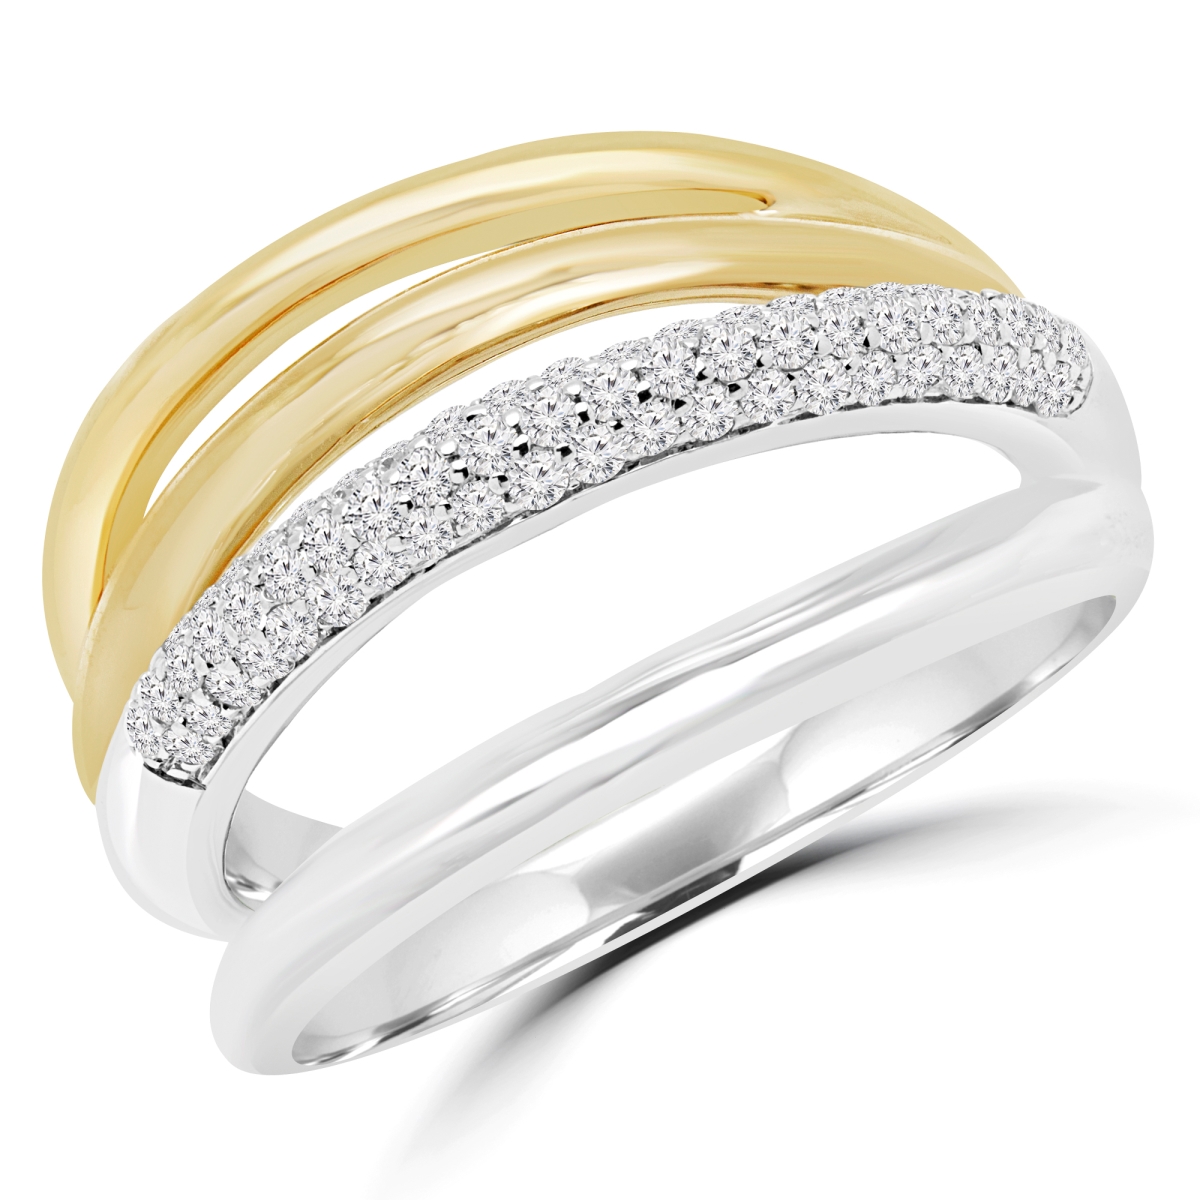 Picture of Majesty Diamonds MDR170050-3.5 0.37 CTW Round Diamond Cocktail Semi-Eternity Ring in 14K Two-Tone Gold - 3.5